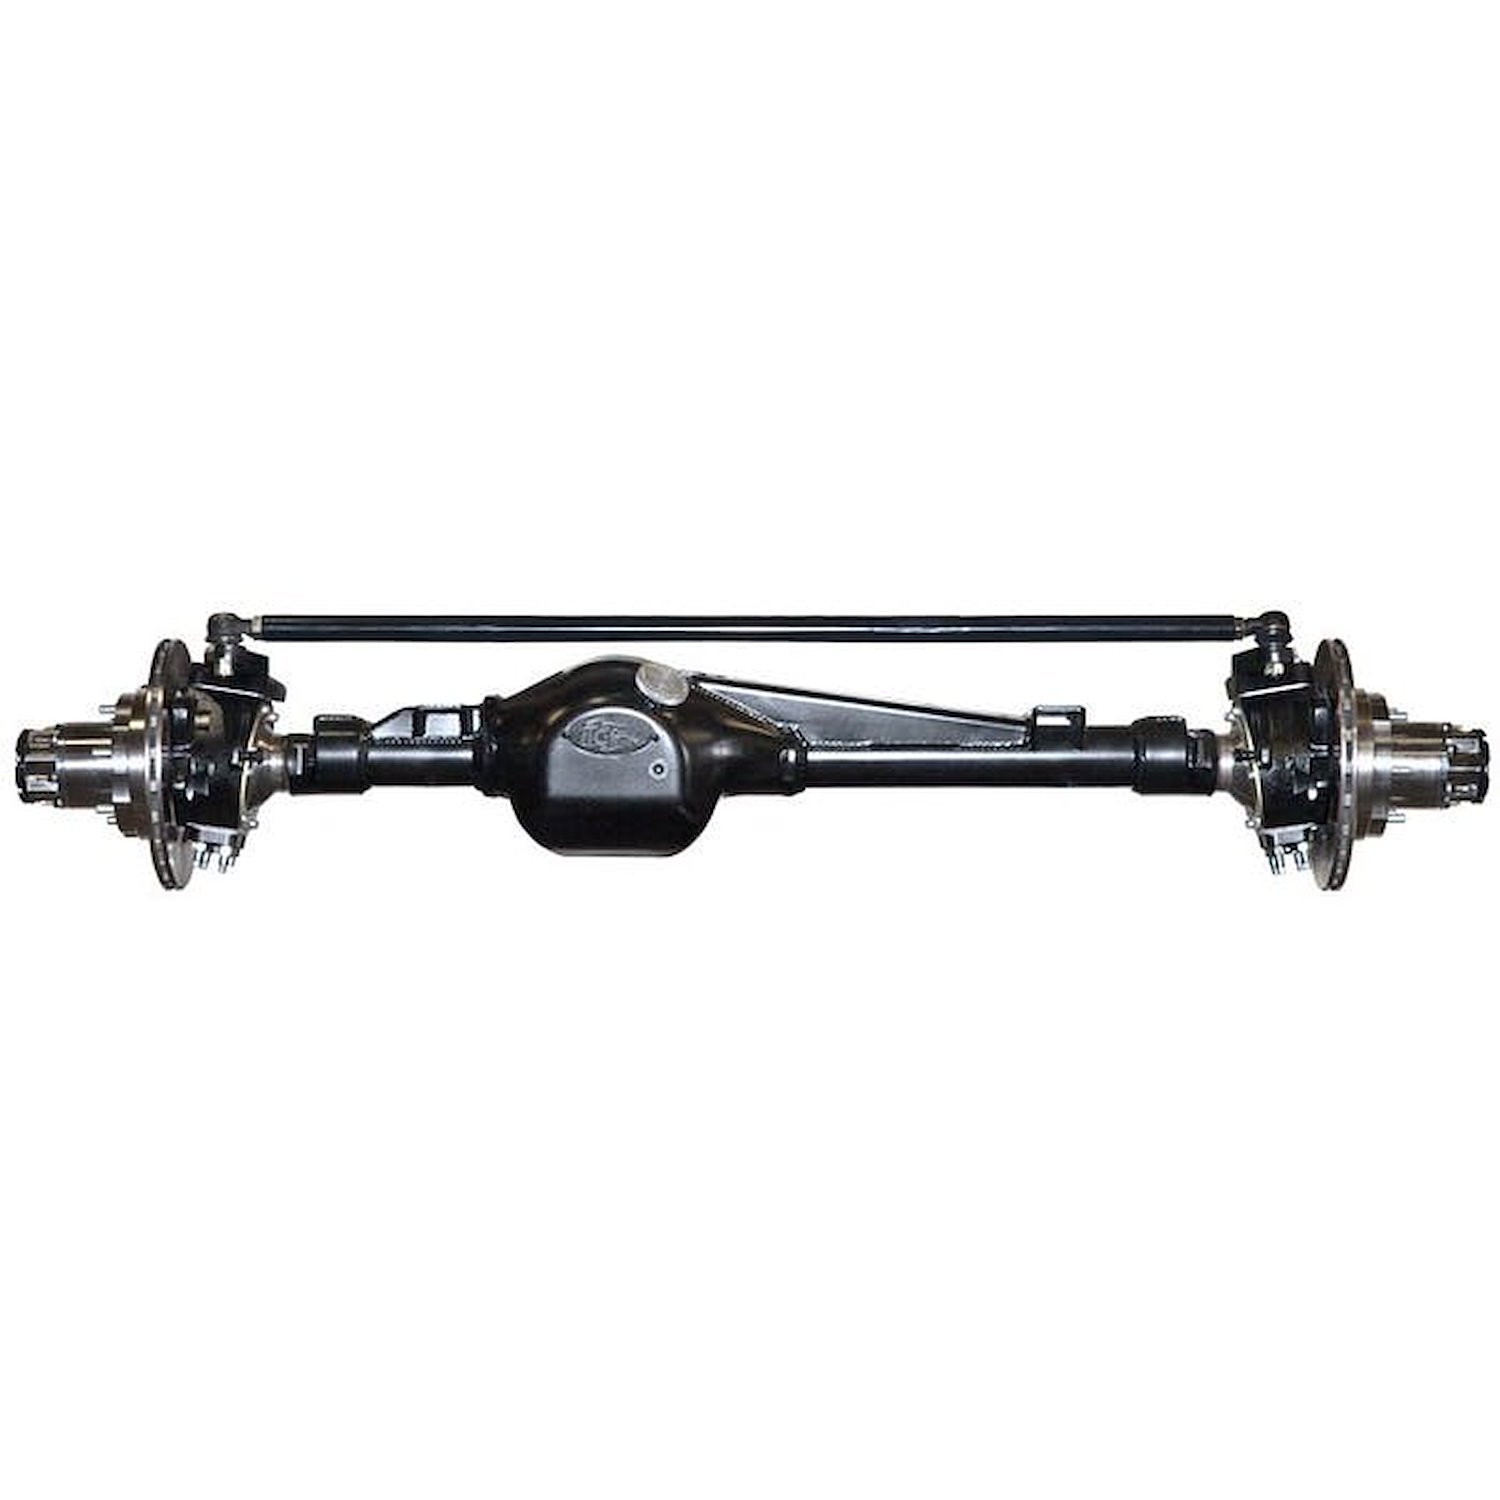 301661-1-KIT Rock Assault Fully-Built Front Axles, +5 Width, RHD, High-Pinion, 5.29, Grizzly, Locking Hubs, Toyota